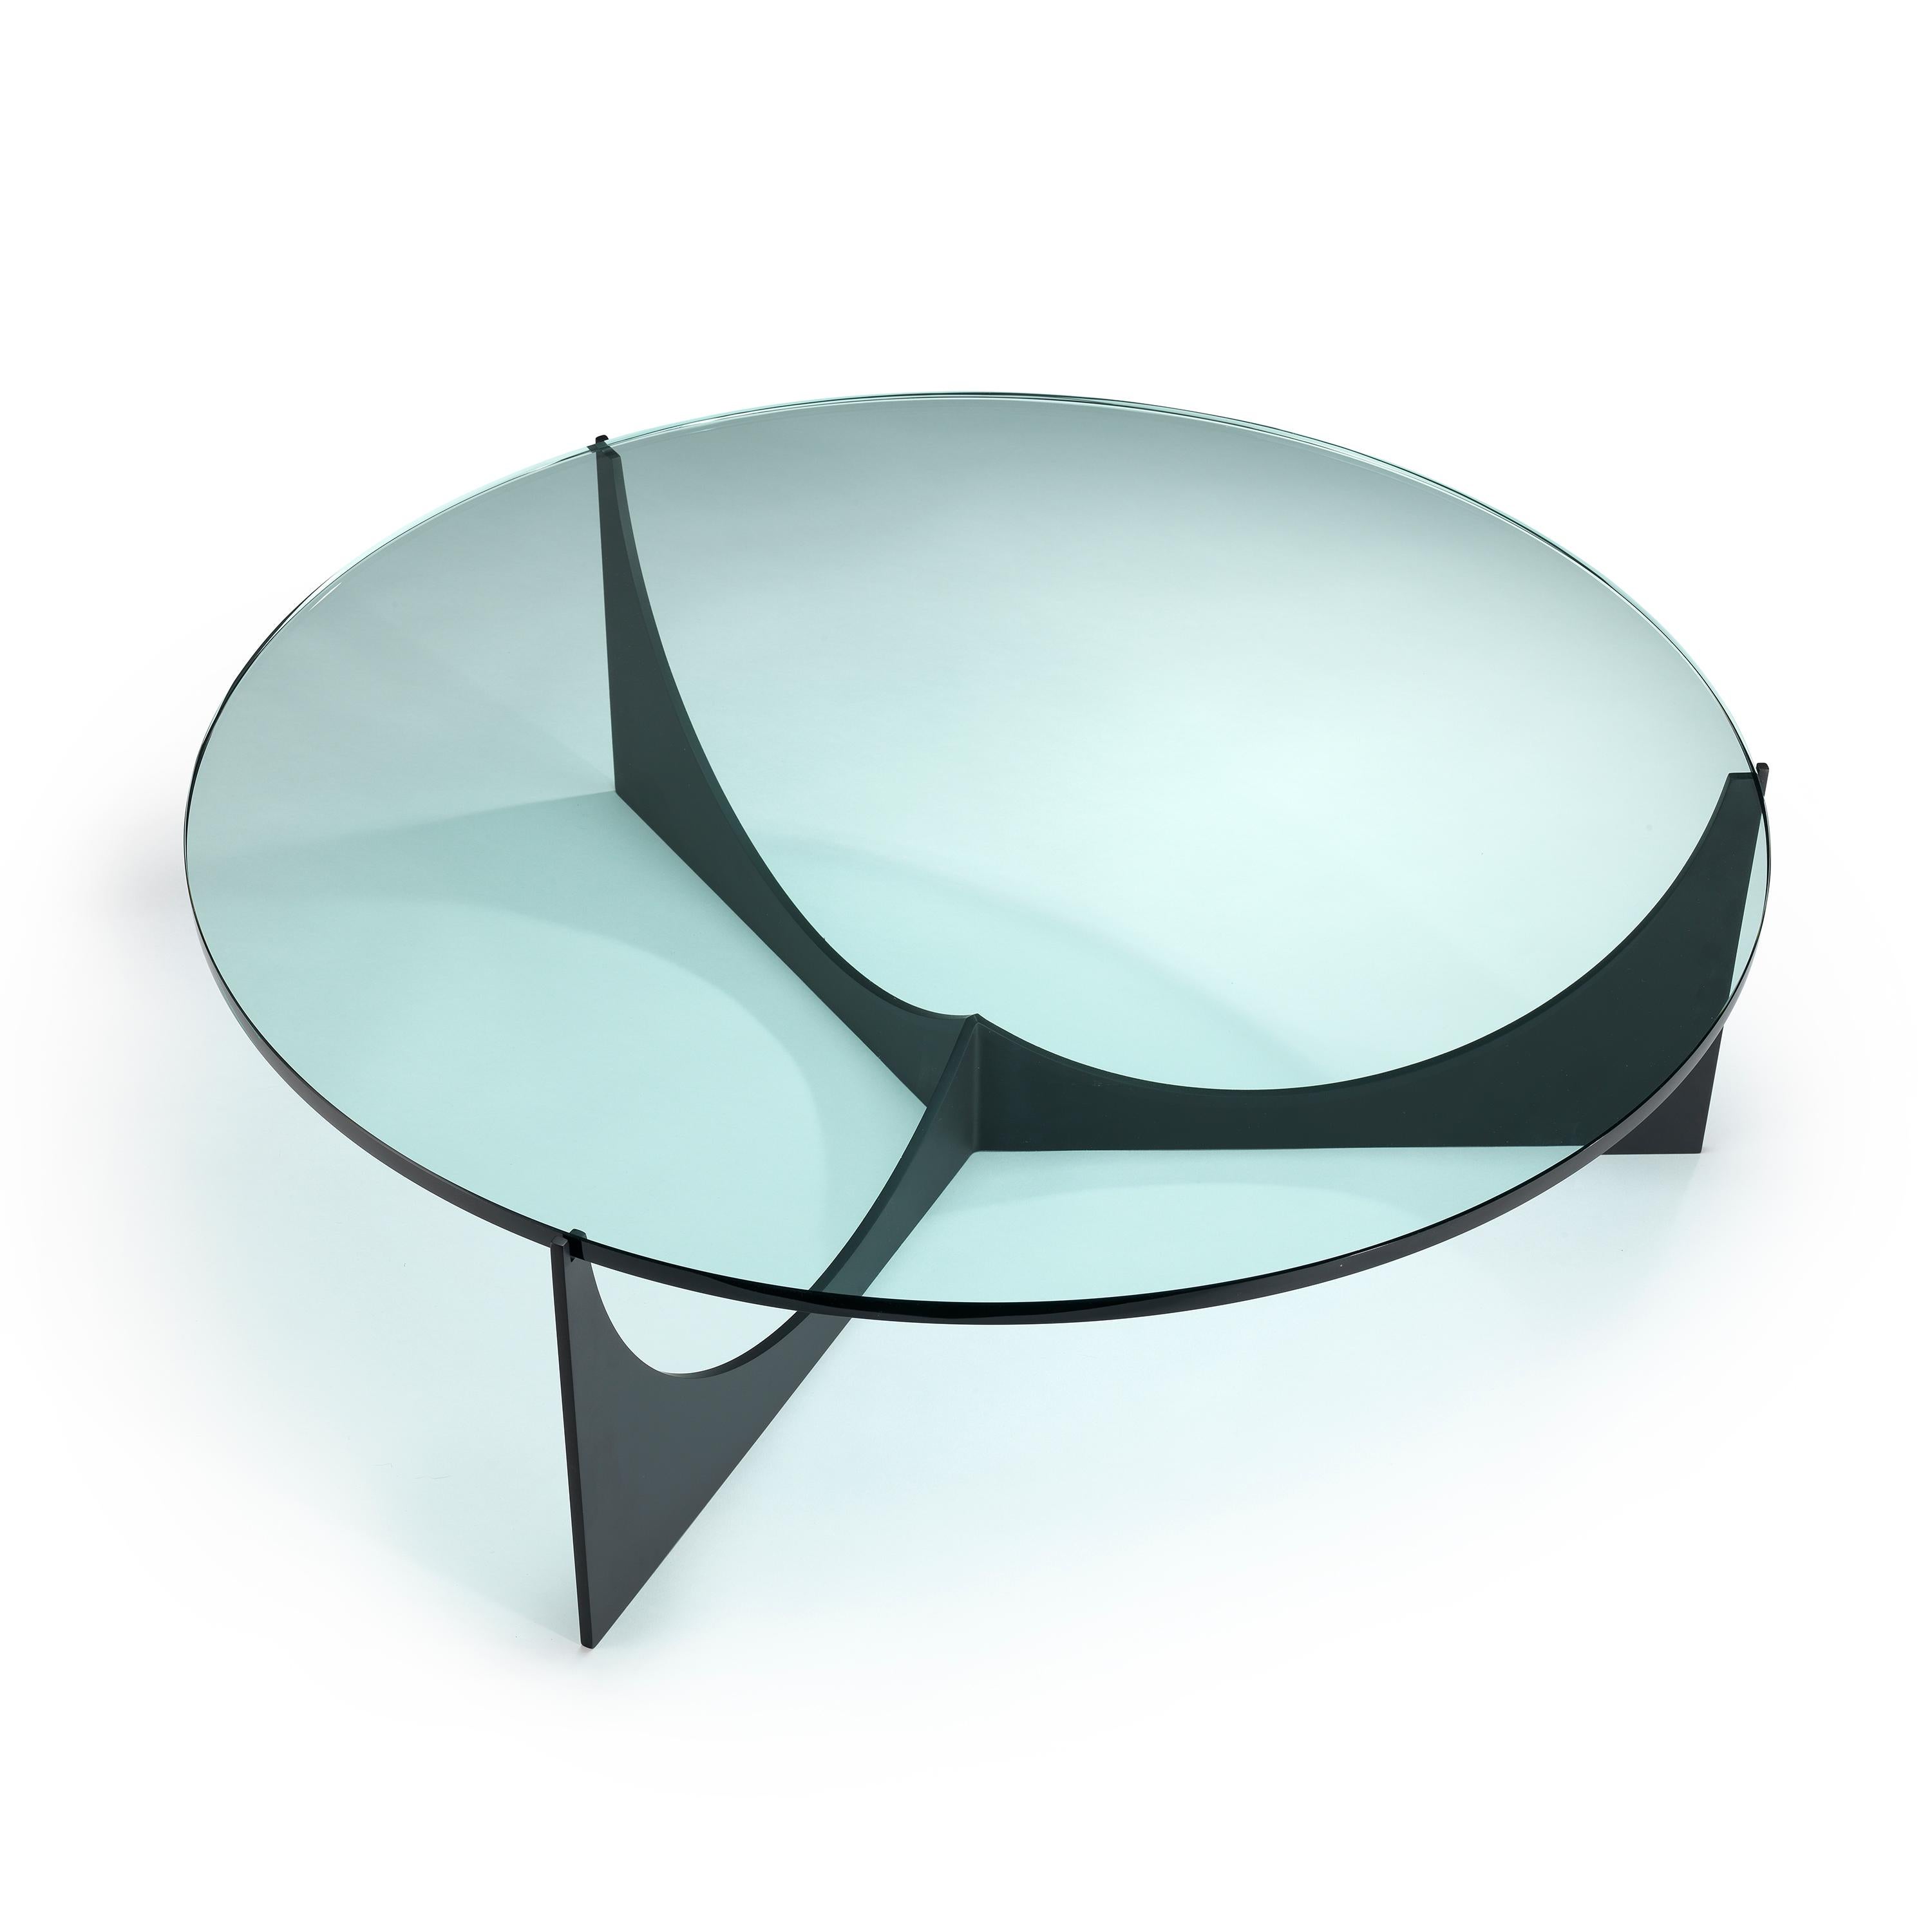 Ten10 eclipse coffee table with a stainless steel base polished or powder coated matte black and a round top 43 3/8